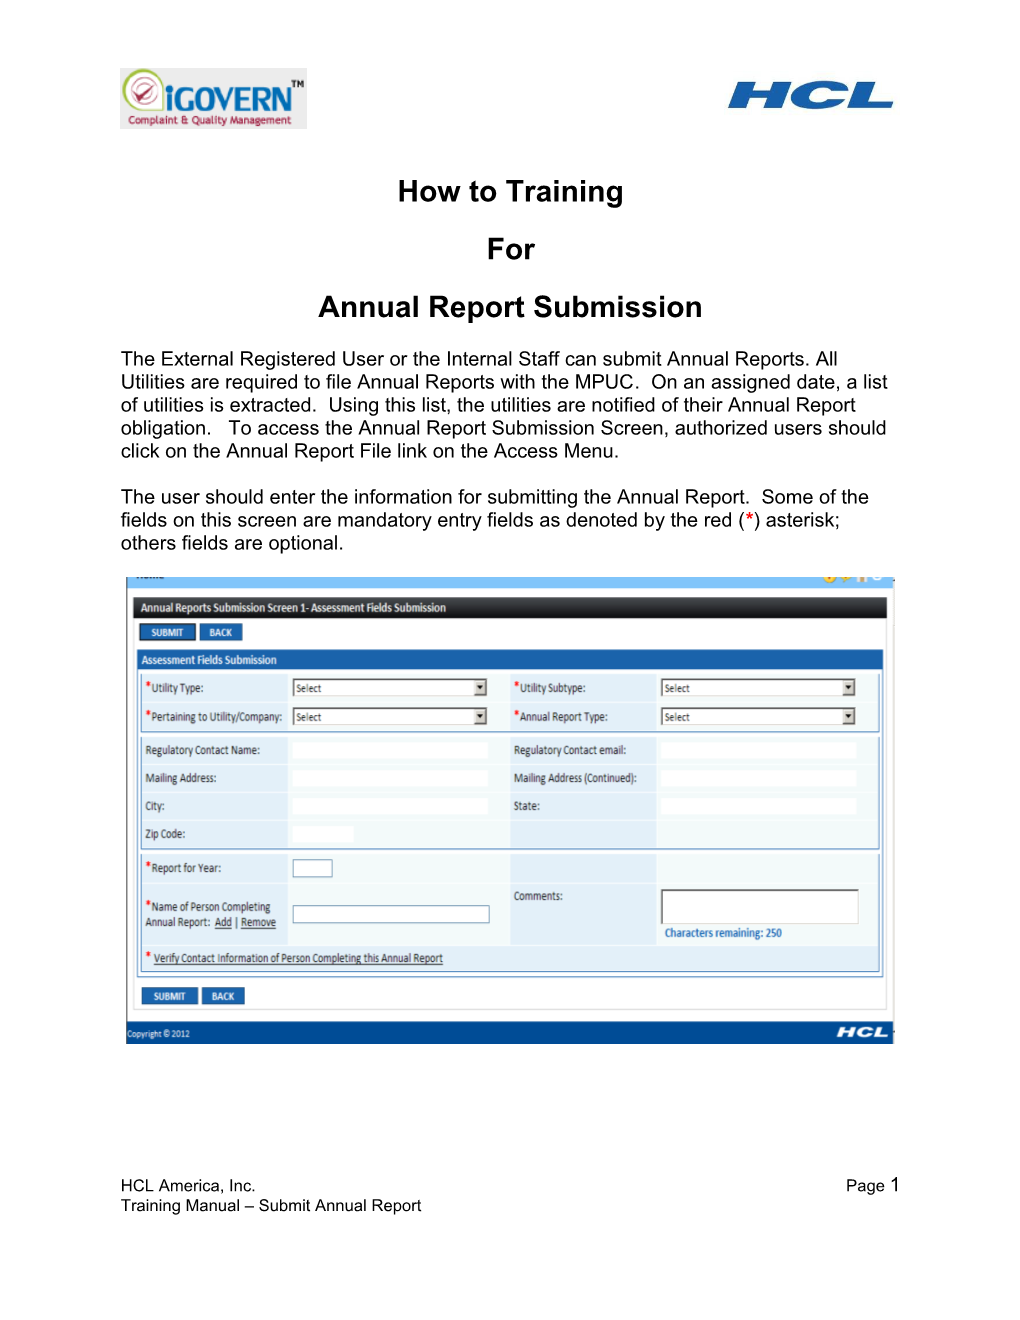 Annual Report Submission